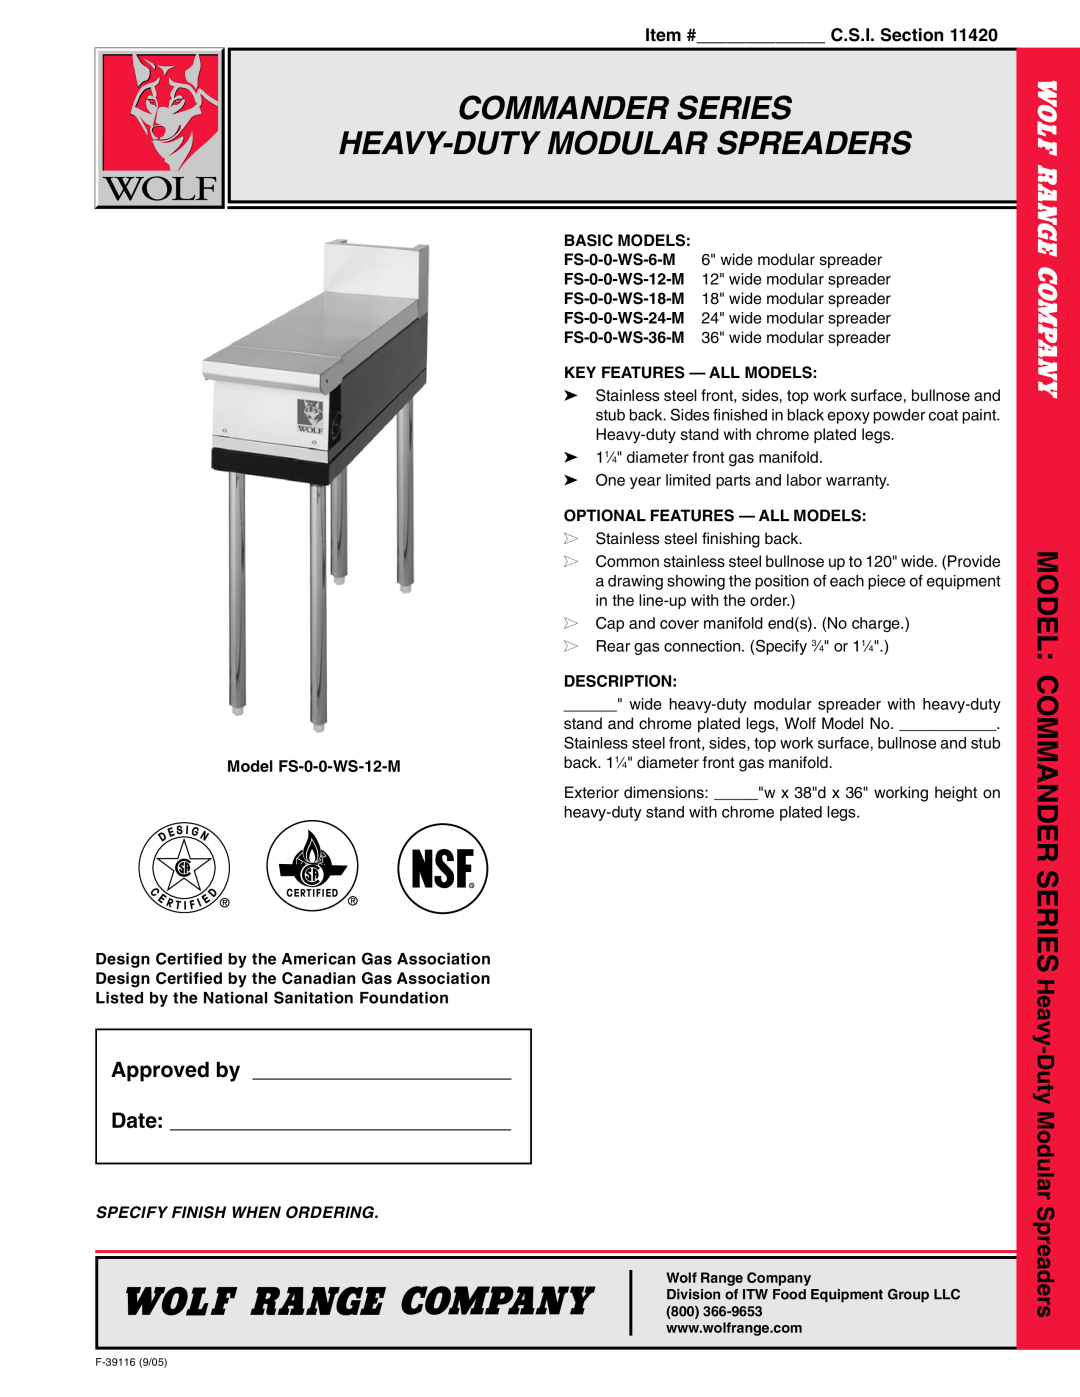 Wolf FS-0-0-WS-24-M warranty Commander Series Heavy-Dutymodular Spreaders, Approved by, Date, Item # C.S.I. Section 